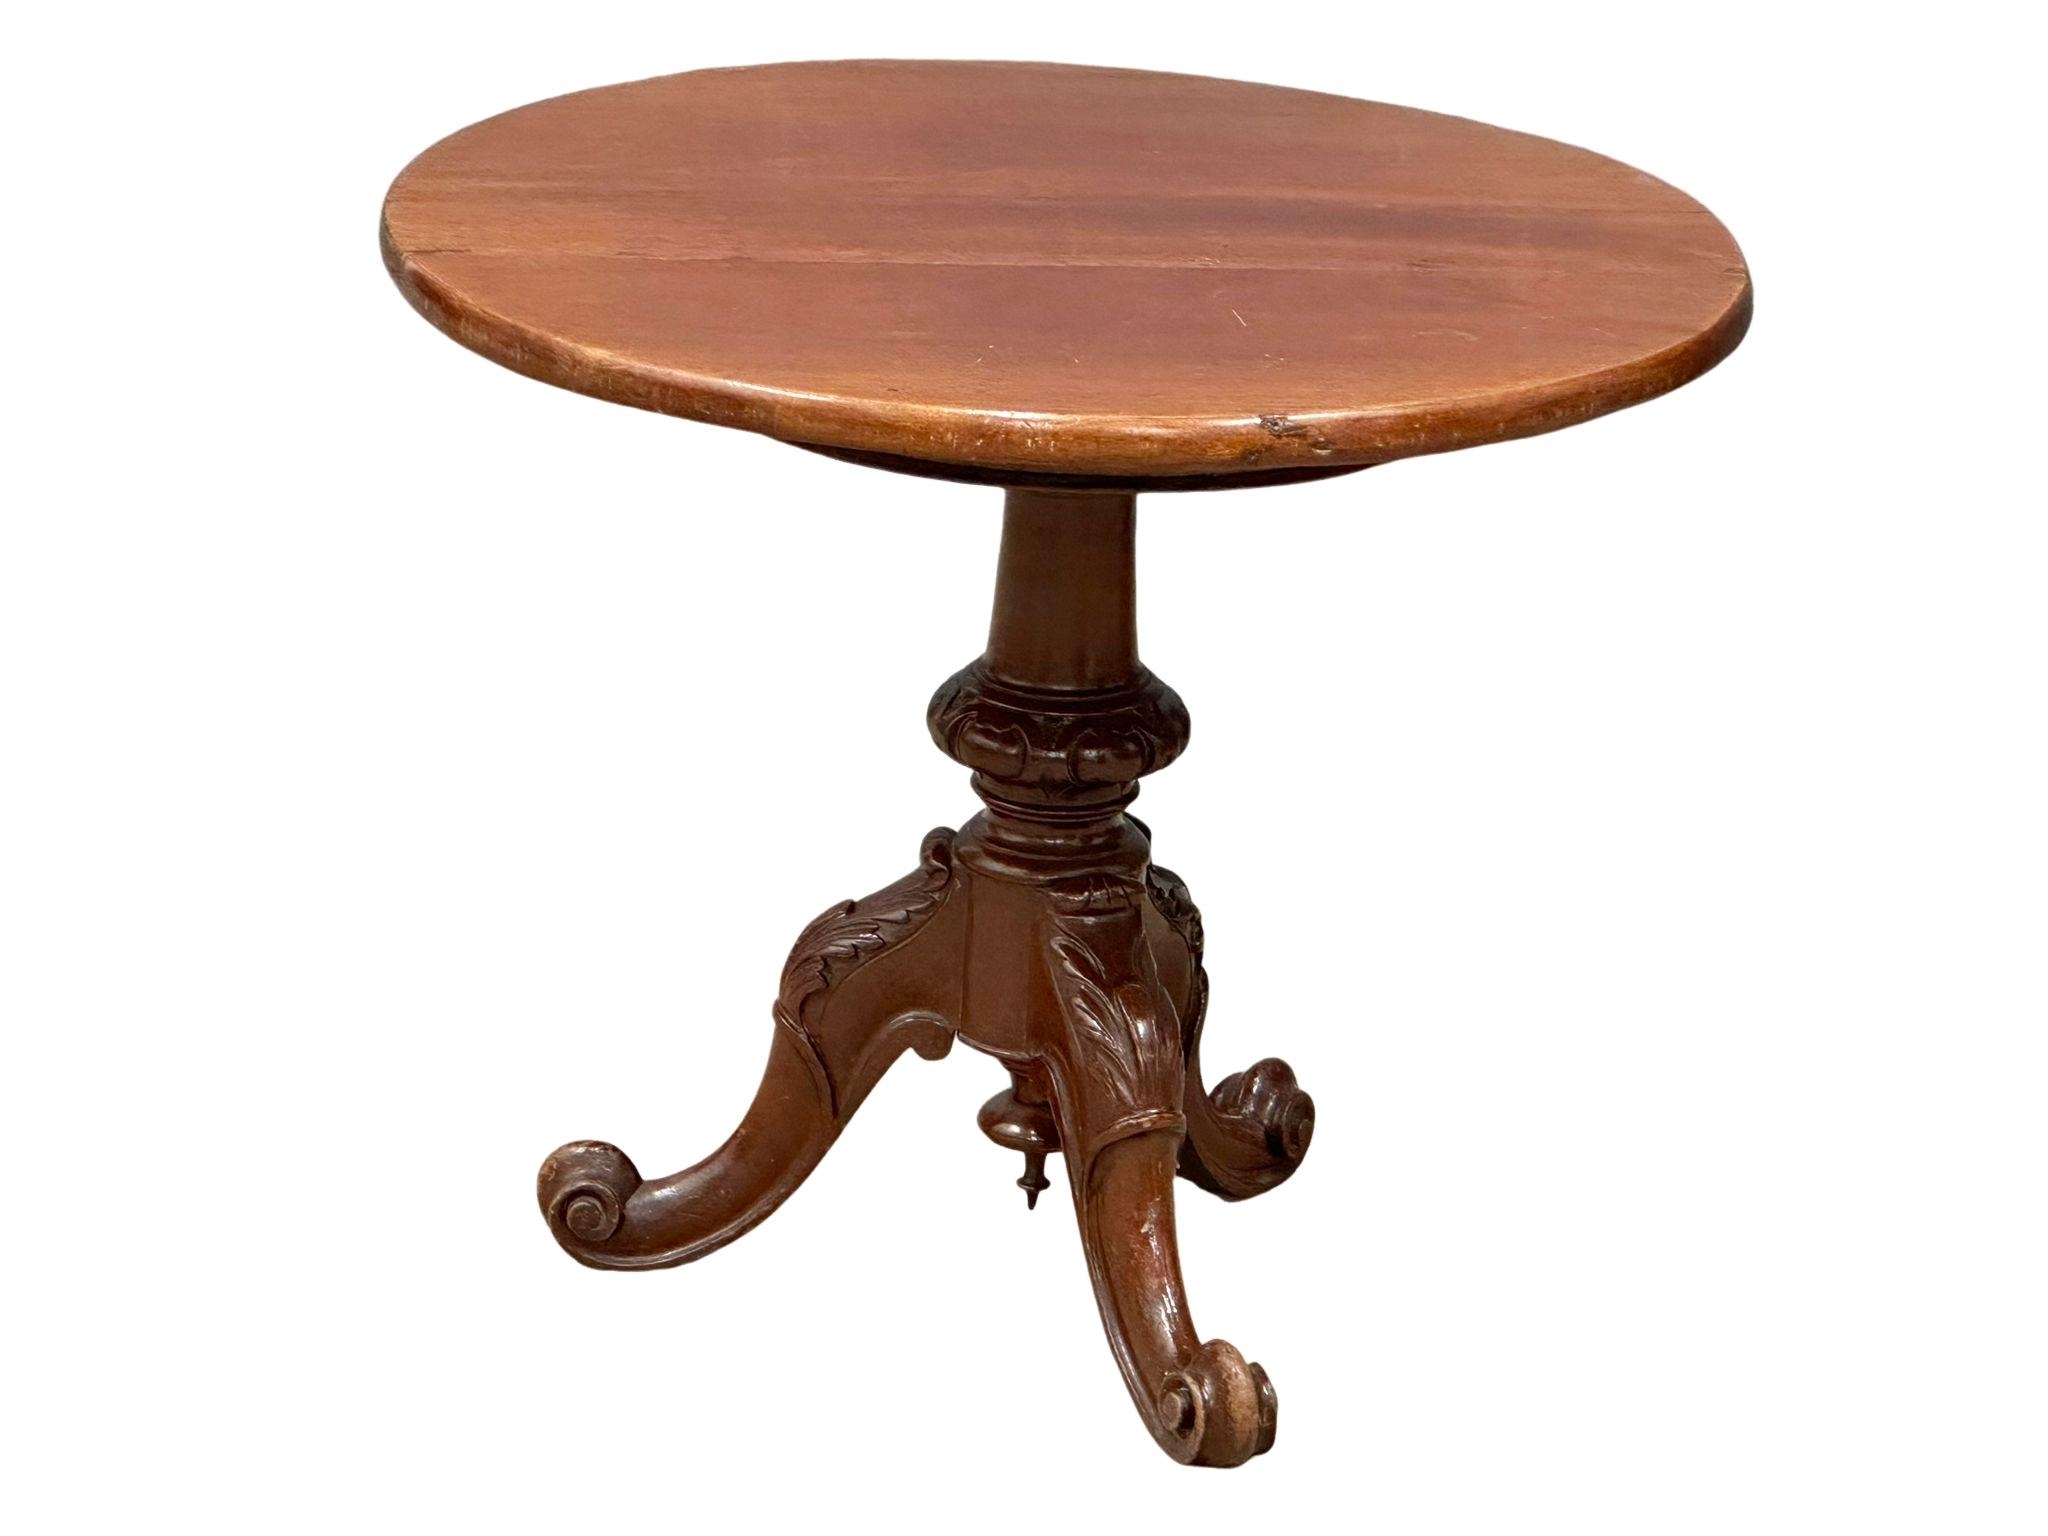 A small Victorian pedestal table/lamp table, on cabriole legs. 56cm x 47cm